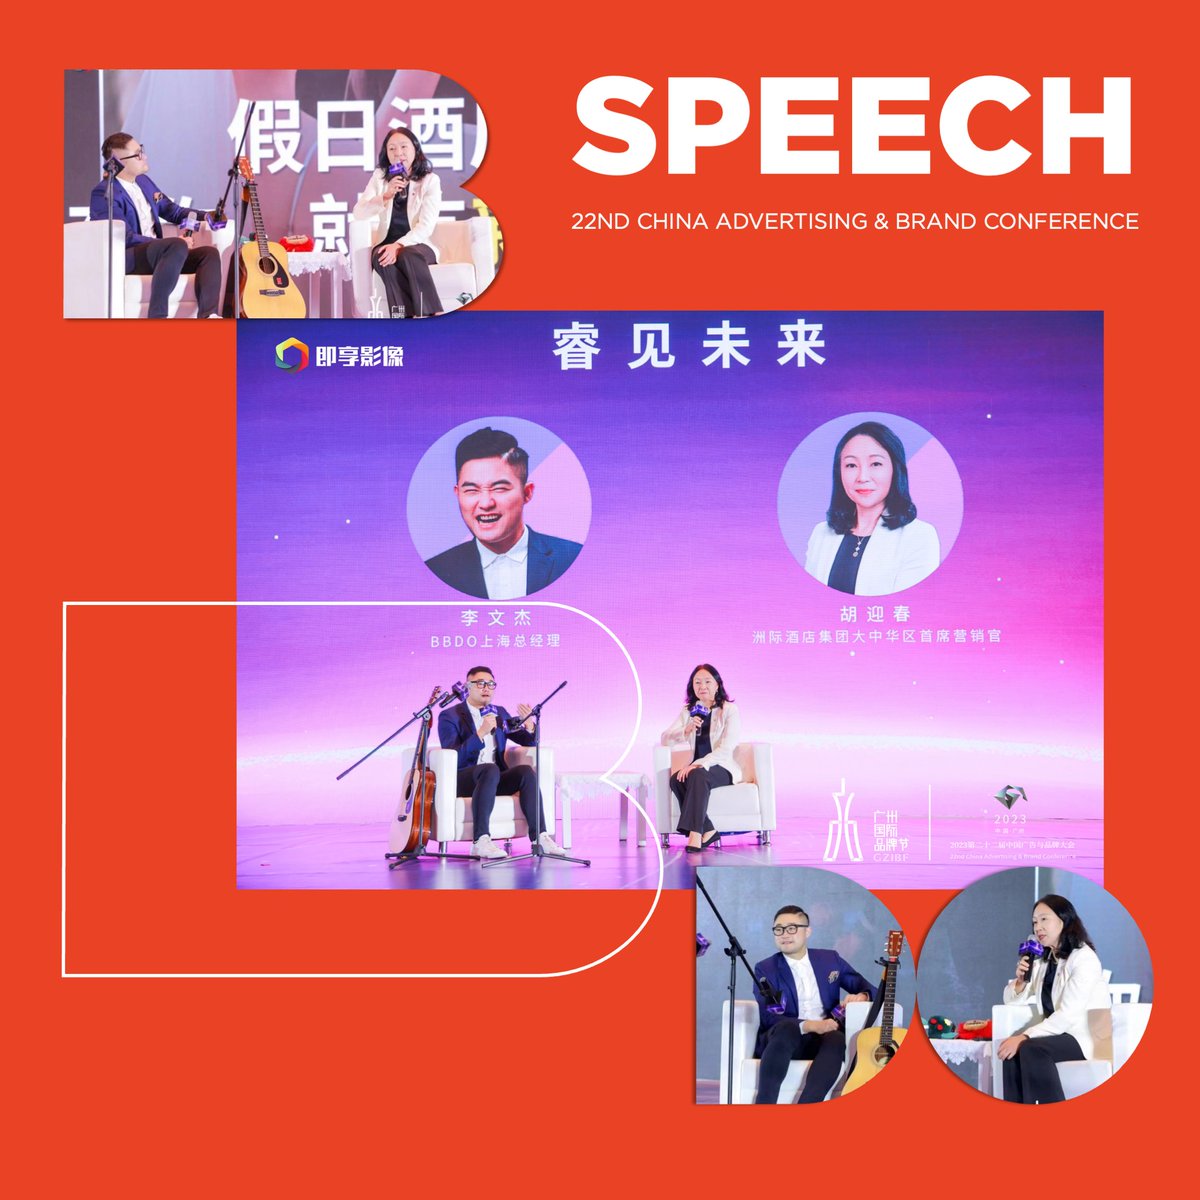 Elvis Li, General Manager of BBDO Shanghai, and Florence Hu, Chief Marketing Officer of IHG Greater China, engaged in an insightful dialogue discussing their perspectives on the future of marketing on 22nd China Advertising & Brand Conference.